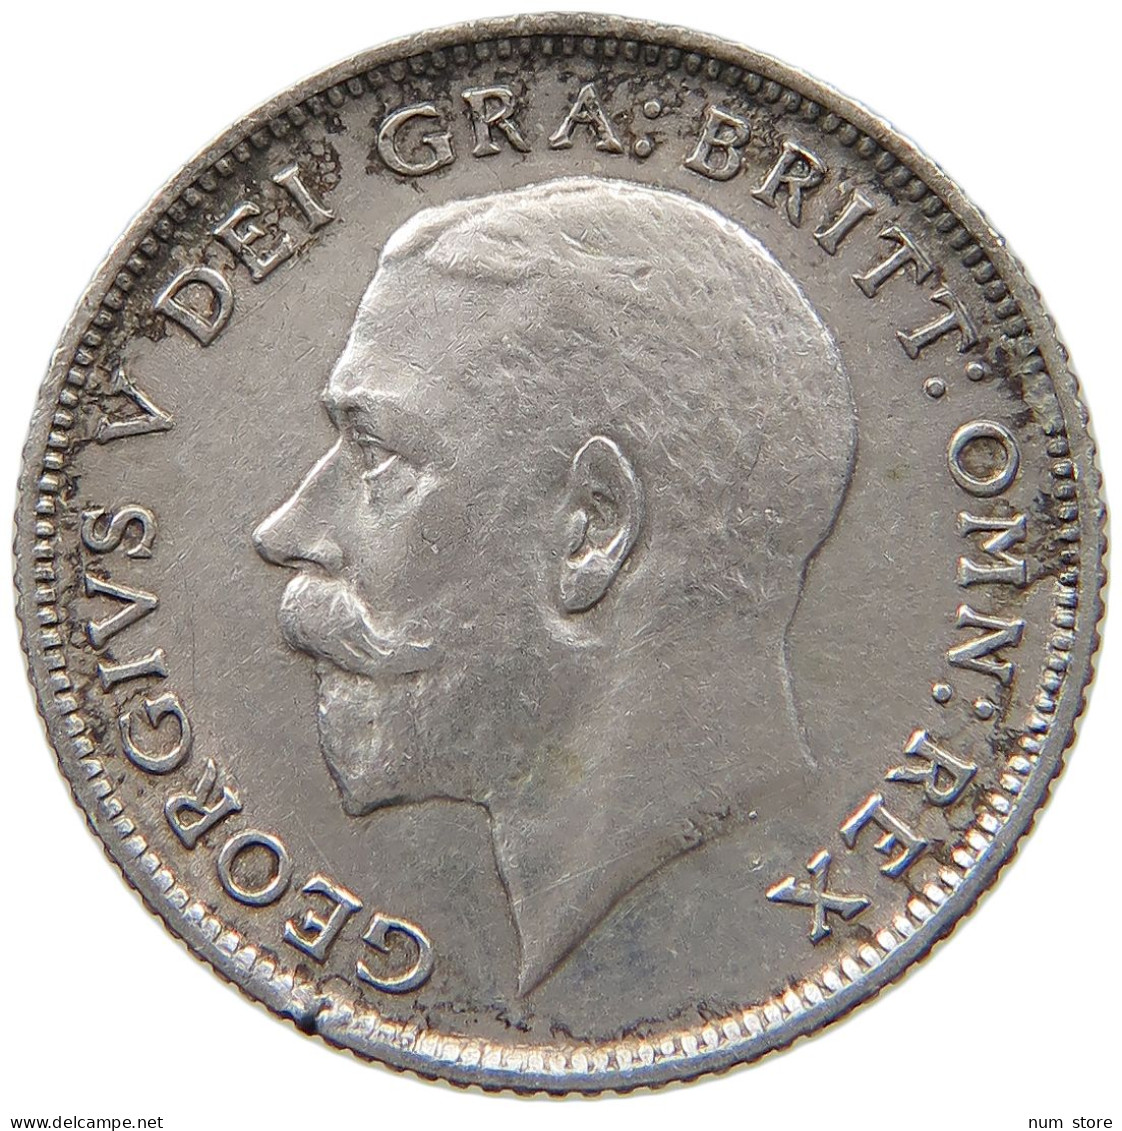 GREAT BRITAIN SIXPENCE 1924 George V. (1910-1936) #a033 0603 - H. 6 Pence